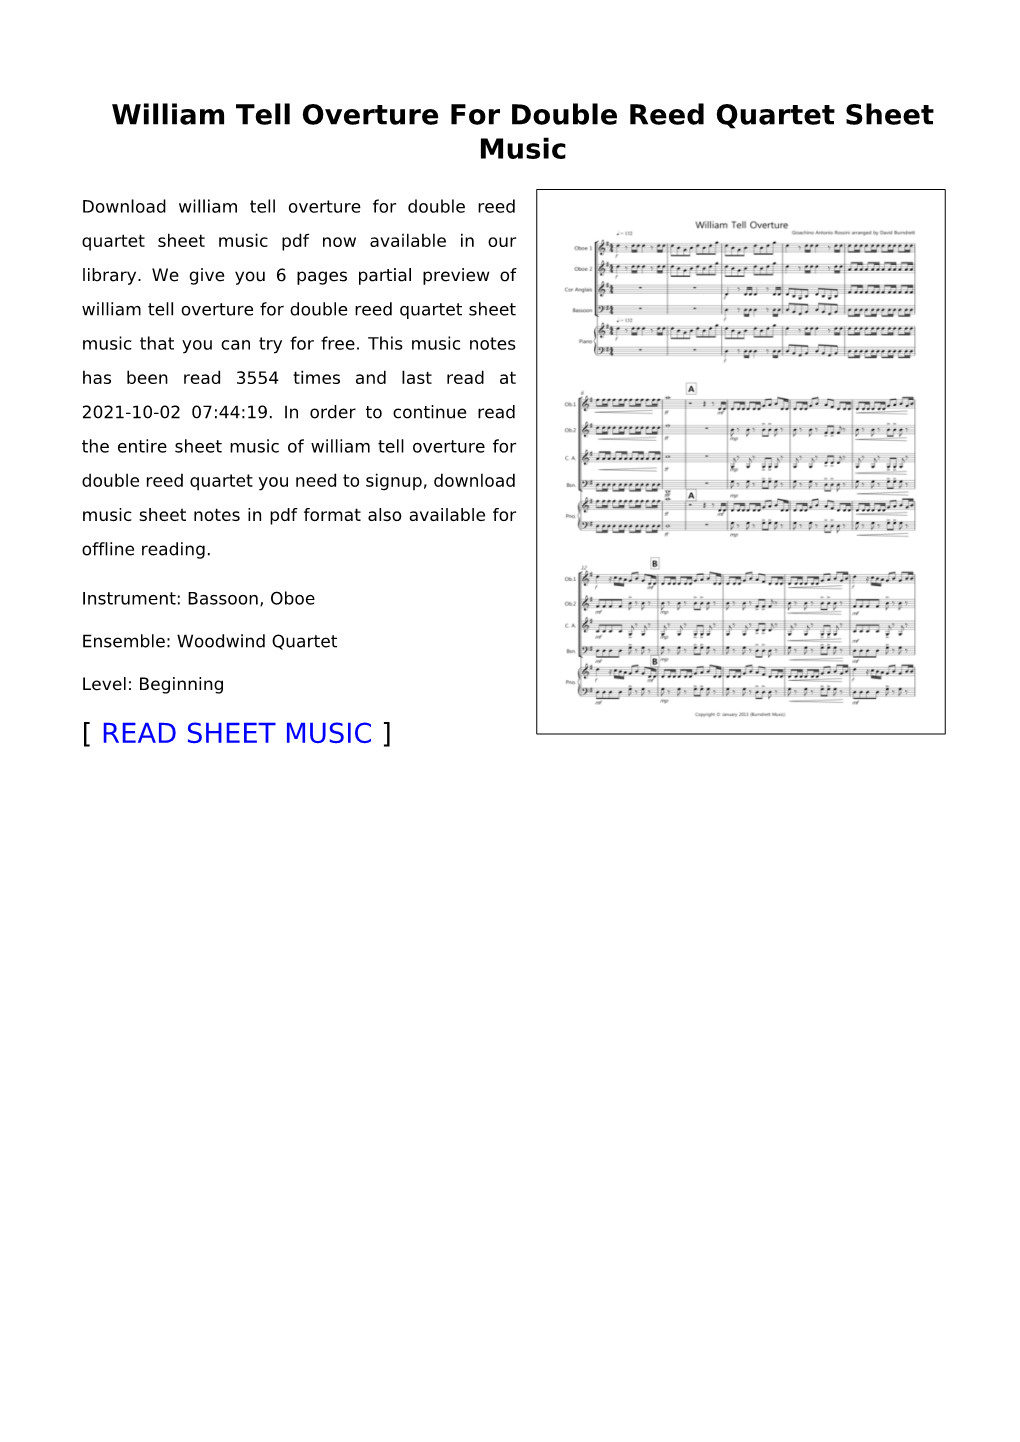 William Tell Overture for Double Reed Quartet Sheet Music